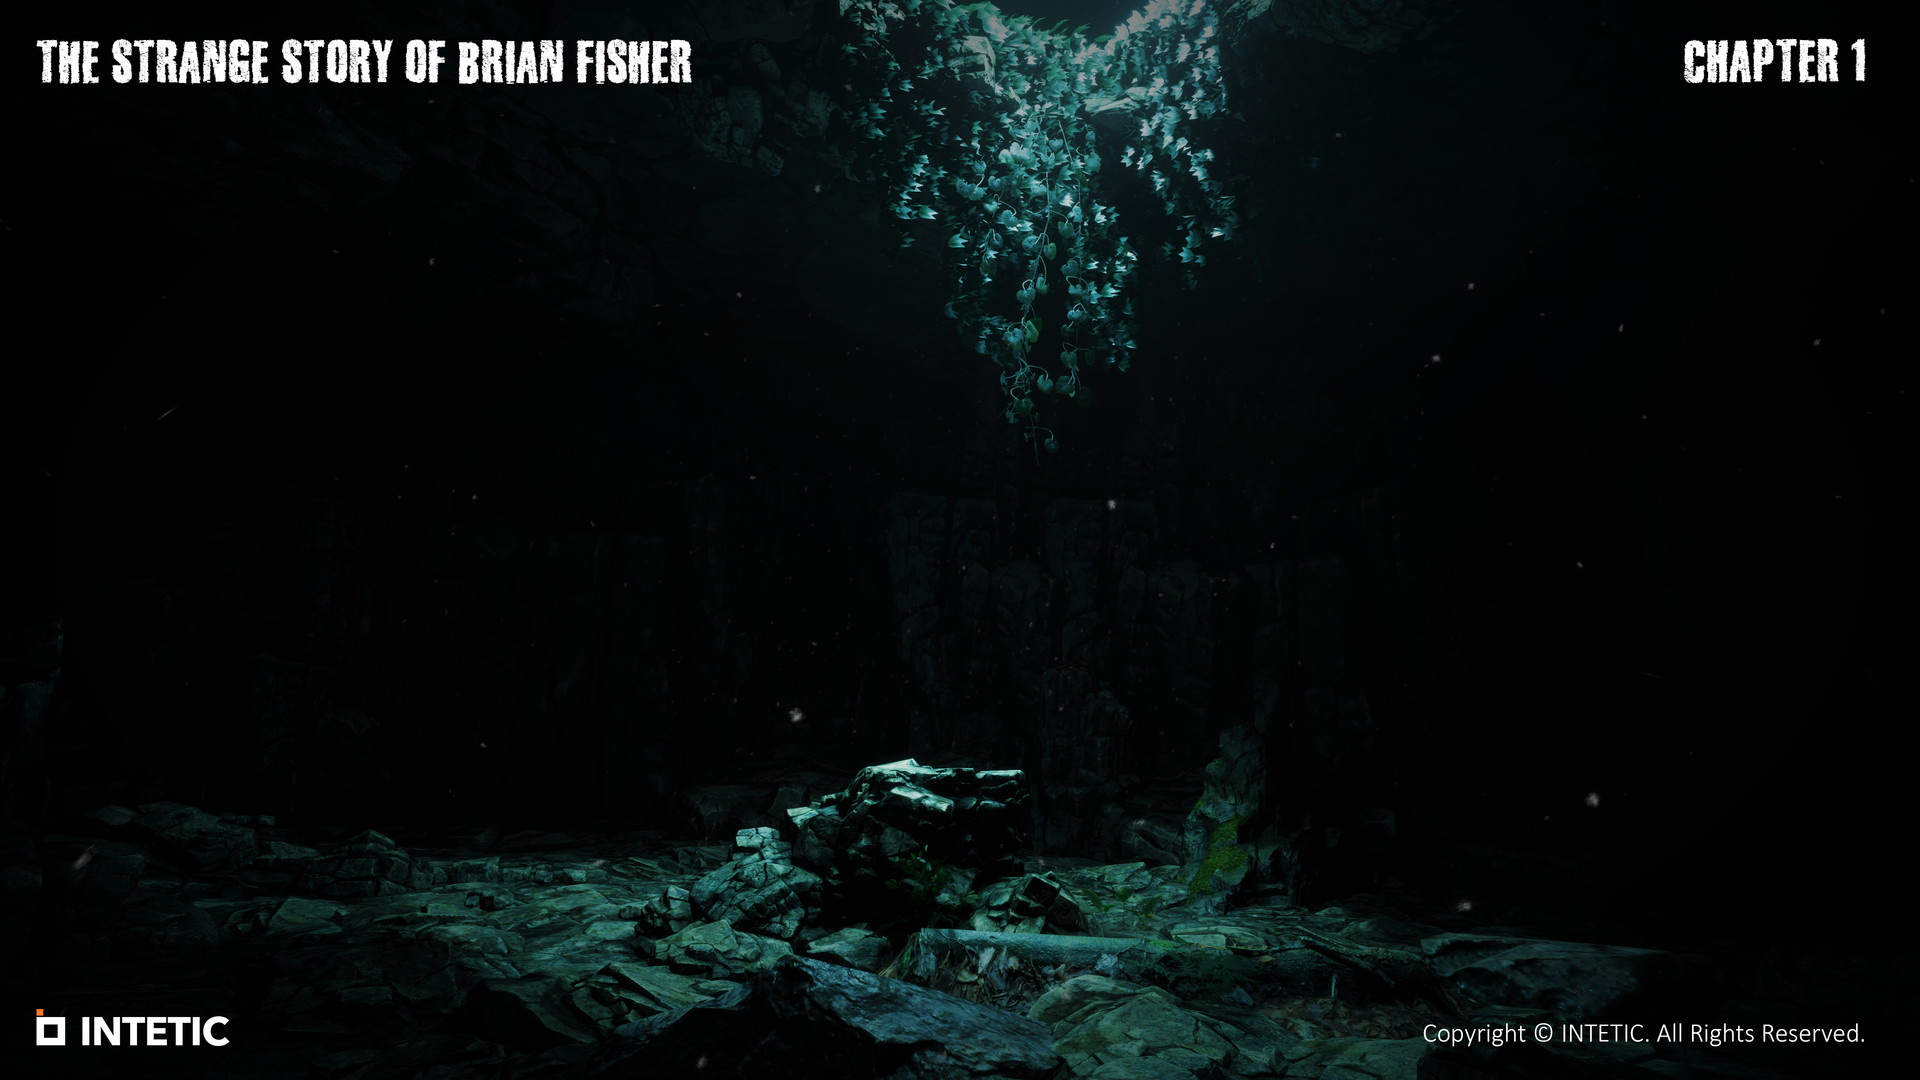 The Strange Story Of Brian Fisher: Chapter 1 Free Download